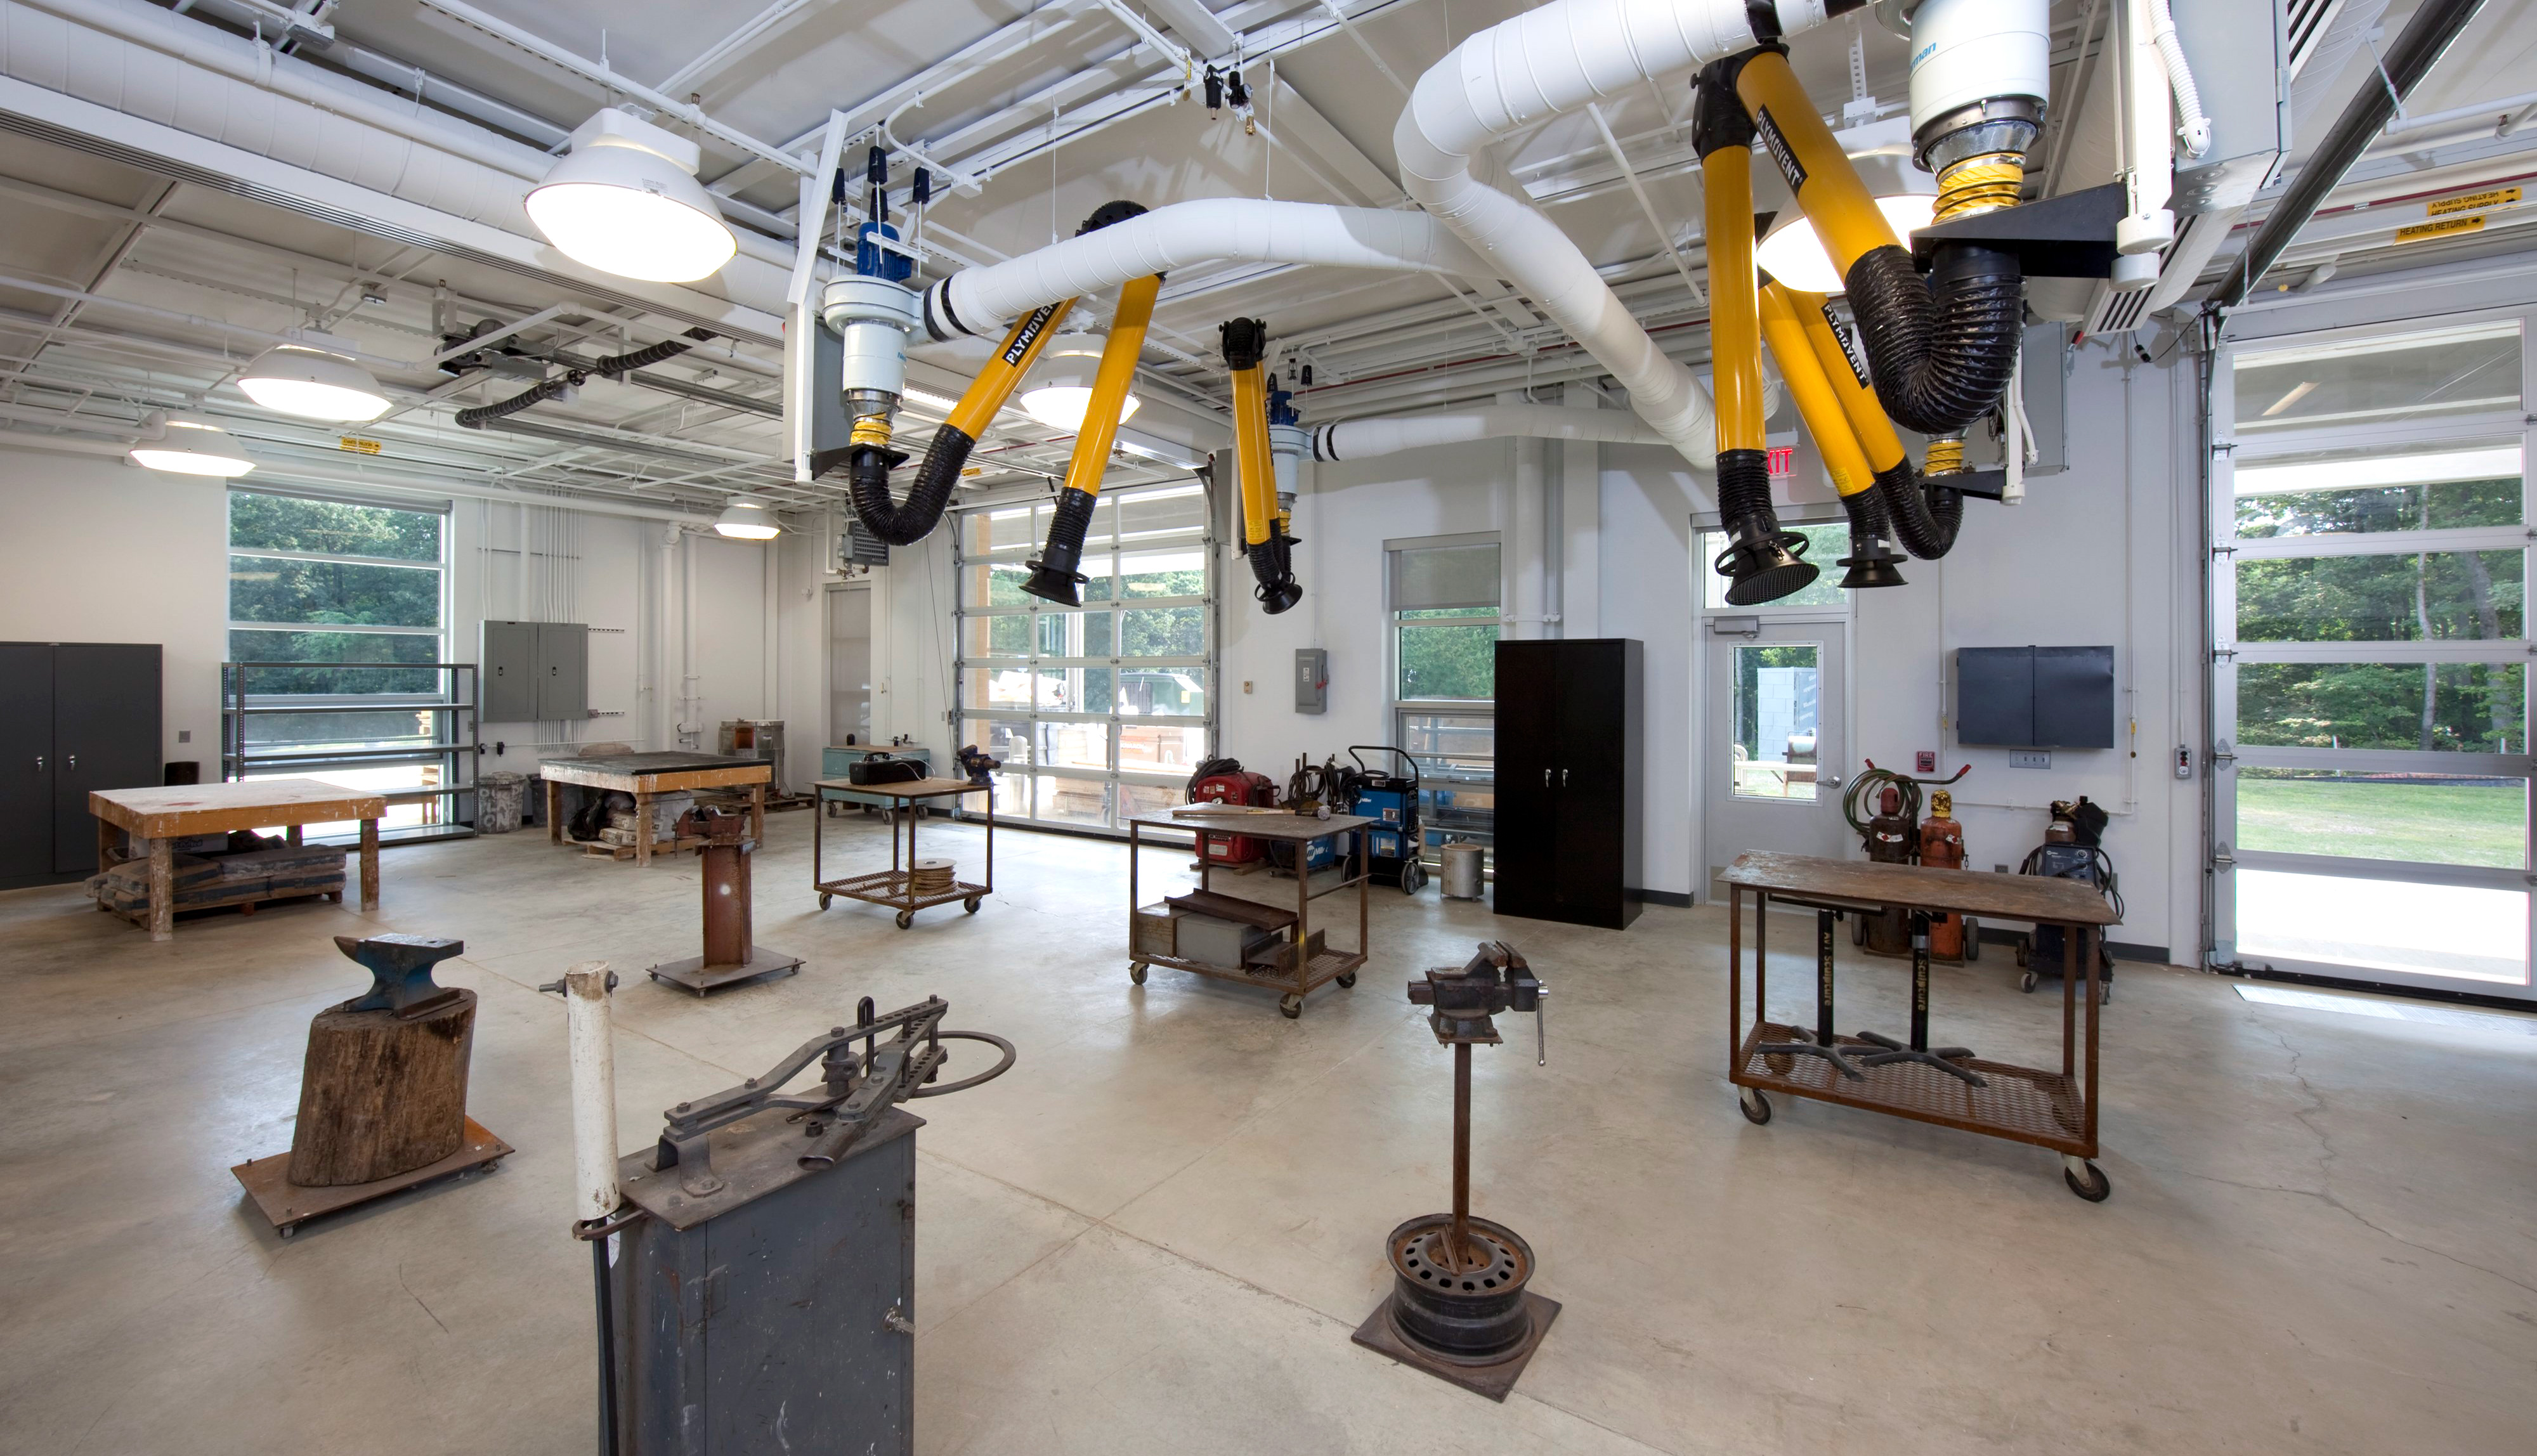 The Sculpture Studio offers a large, airy room with equipment for woodworking, clay, metalworking, and more.